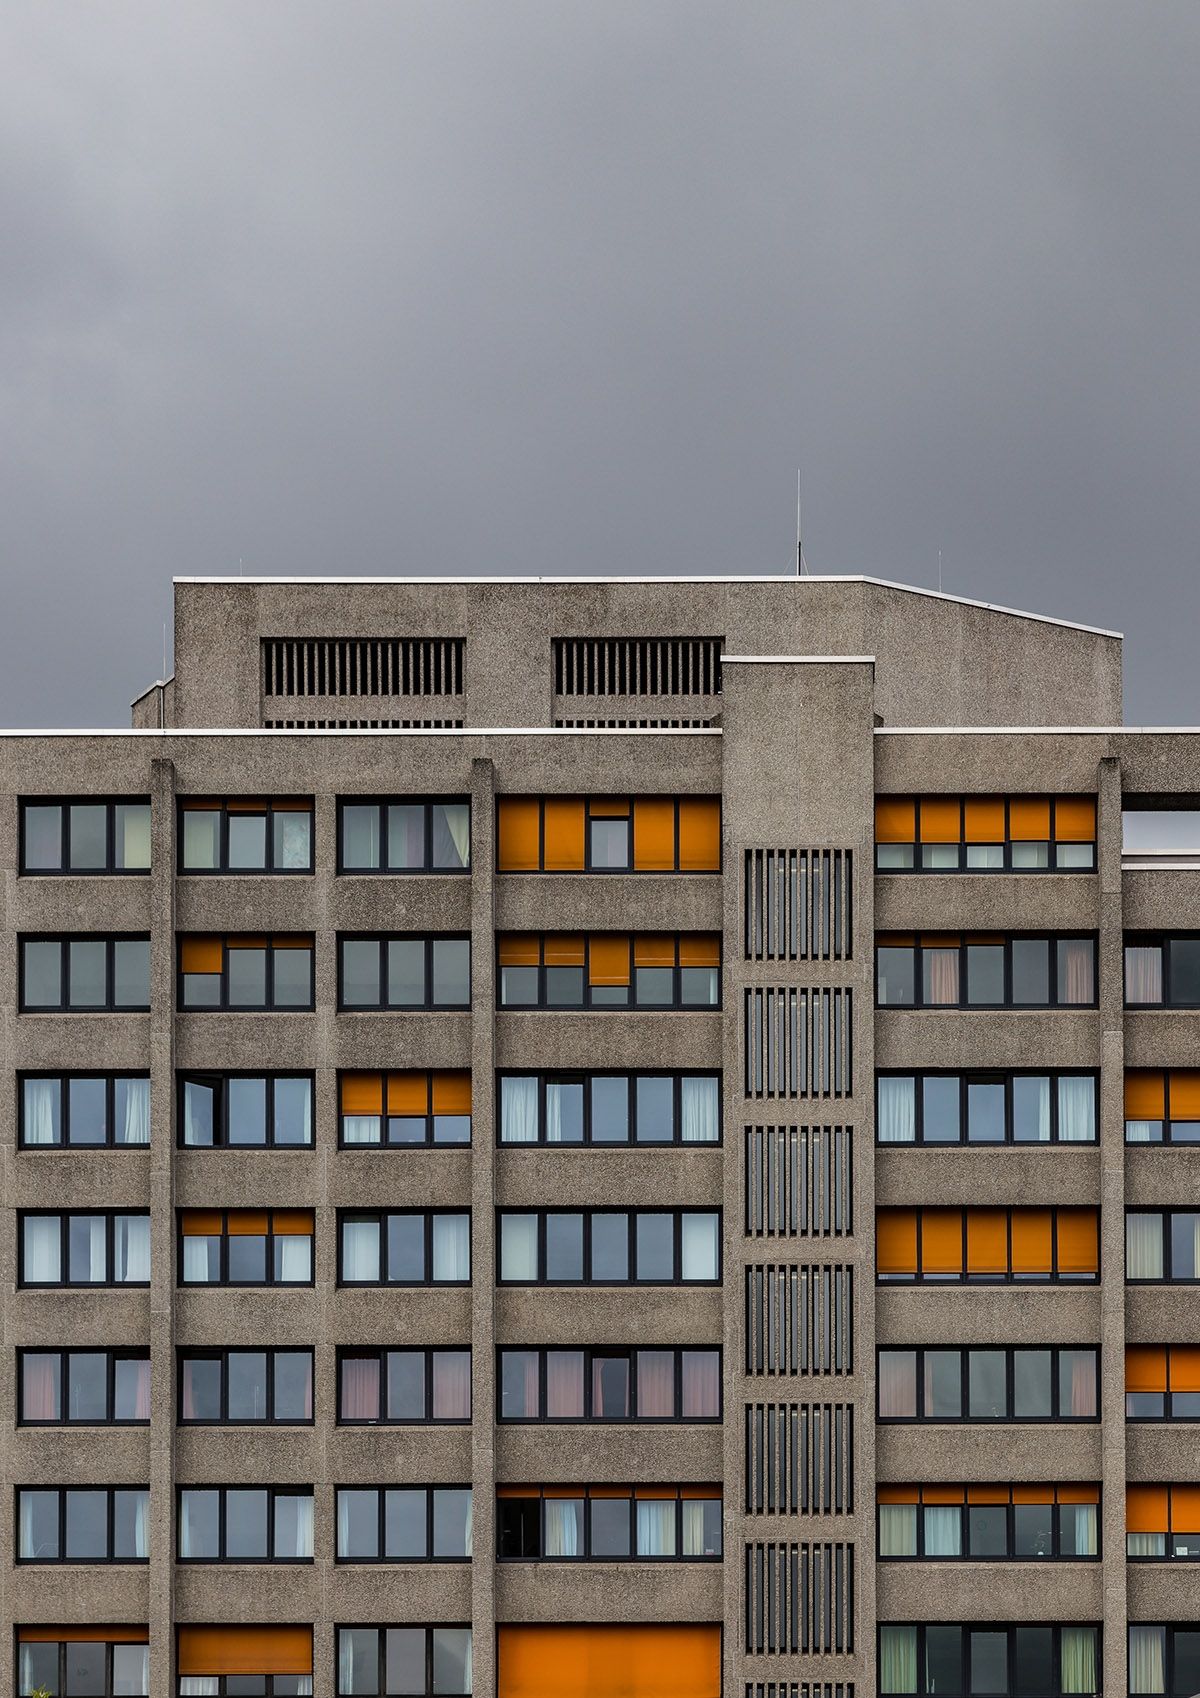 Grey, concrete buildings set against a dark, stormy sky would make ...